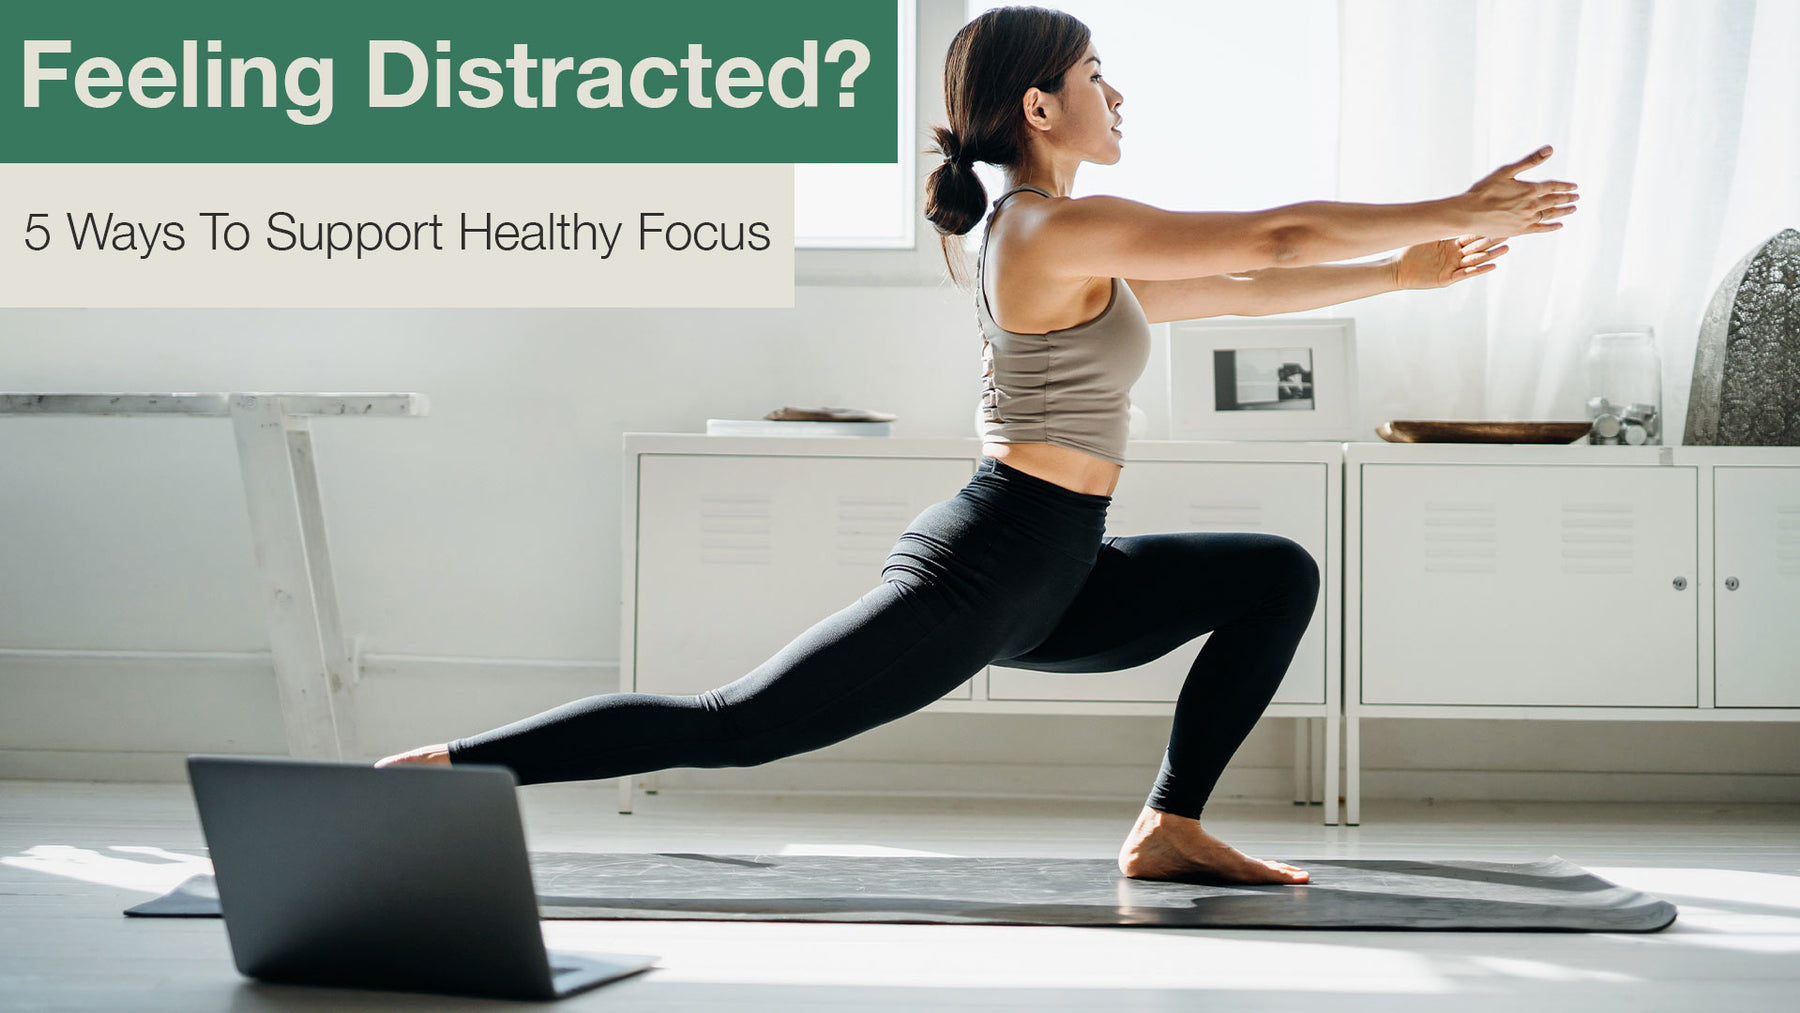 Feeling Distracted? 5 Ways To Support Healthy Focus